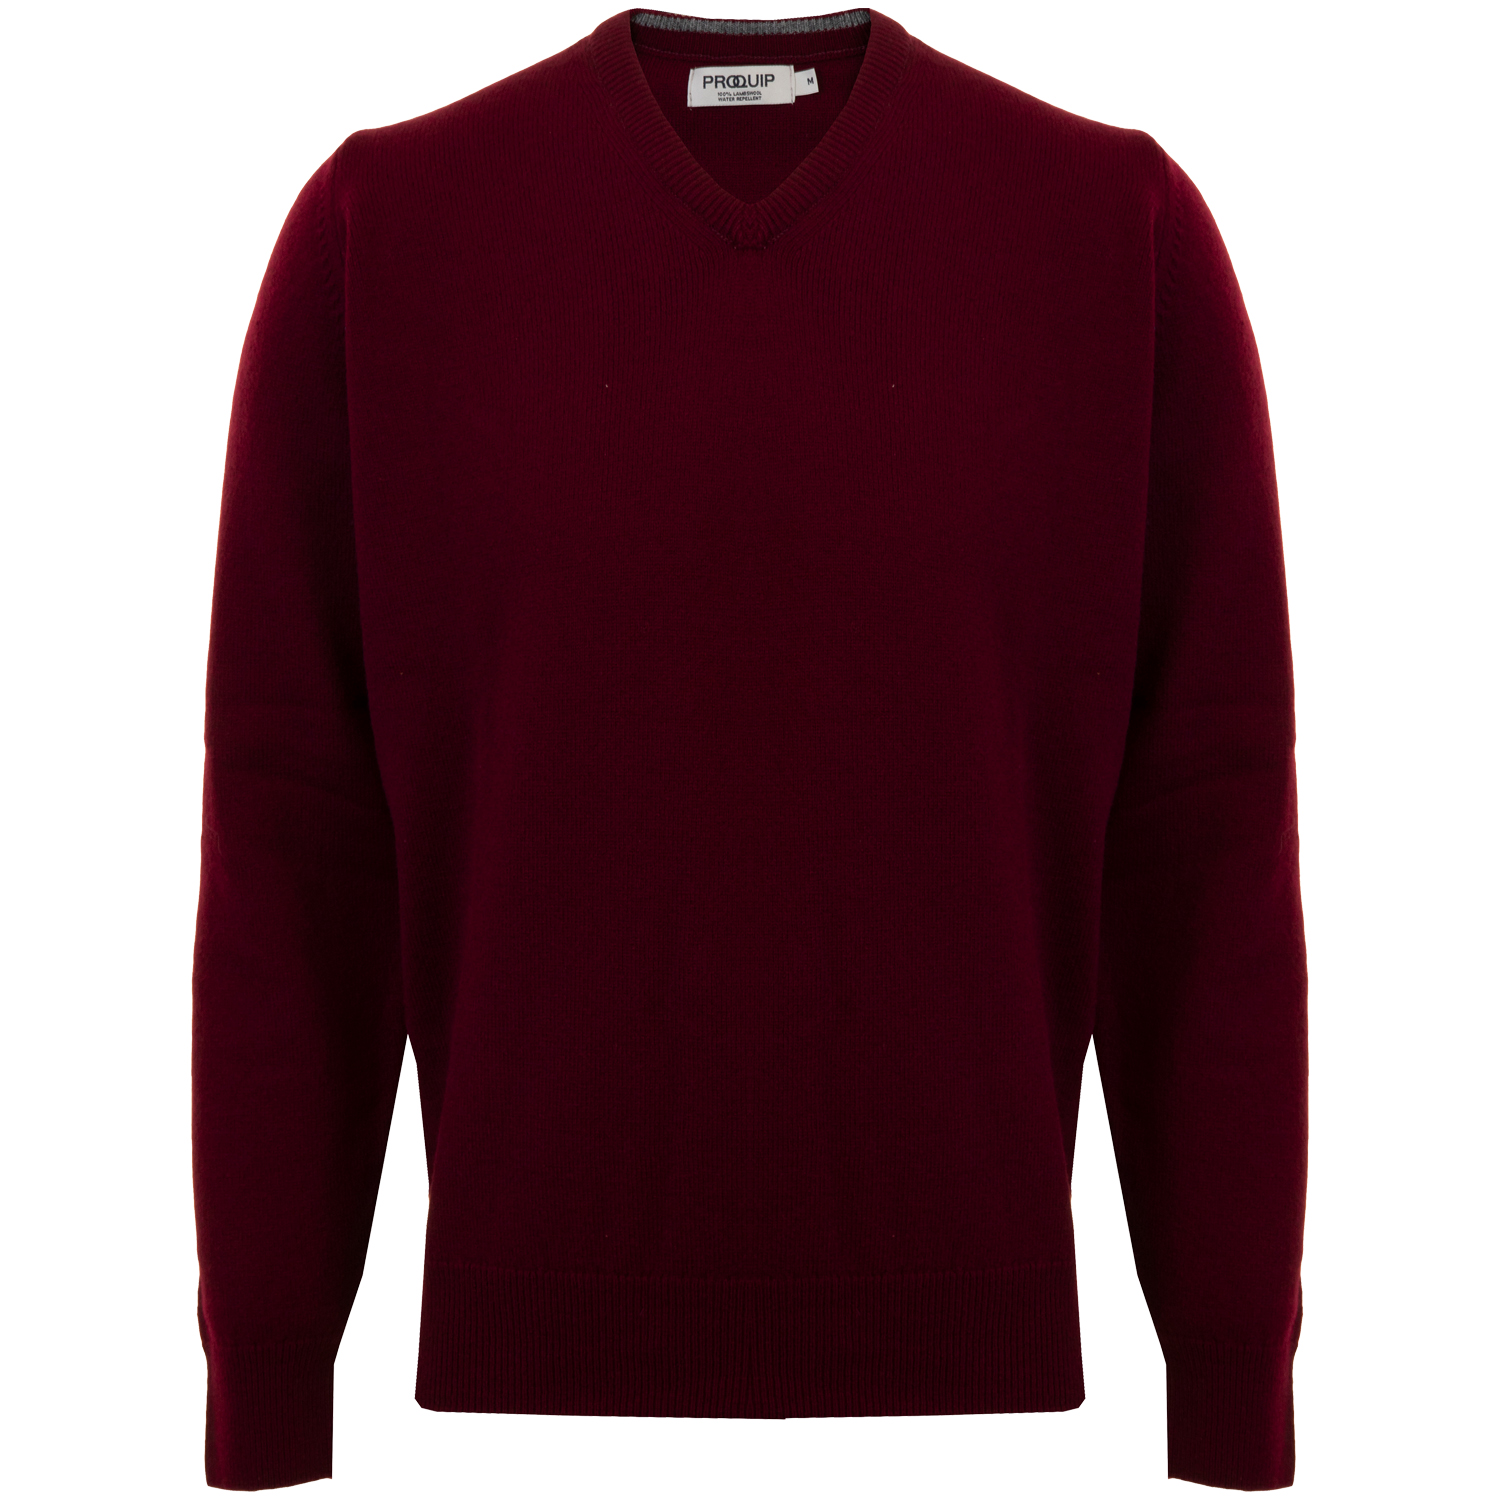 Proquip Mens Lambswool V-Neck Golf Sweater  - Bordeaux